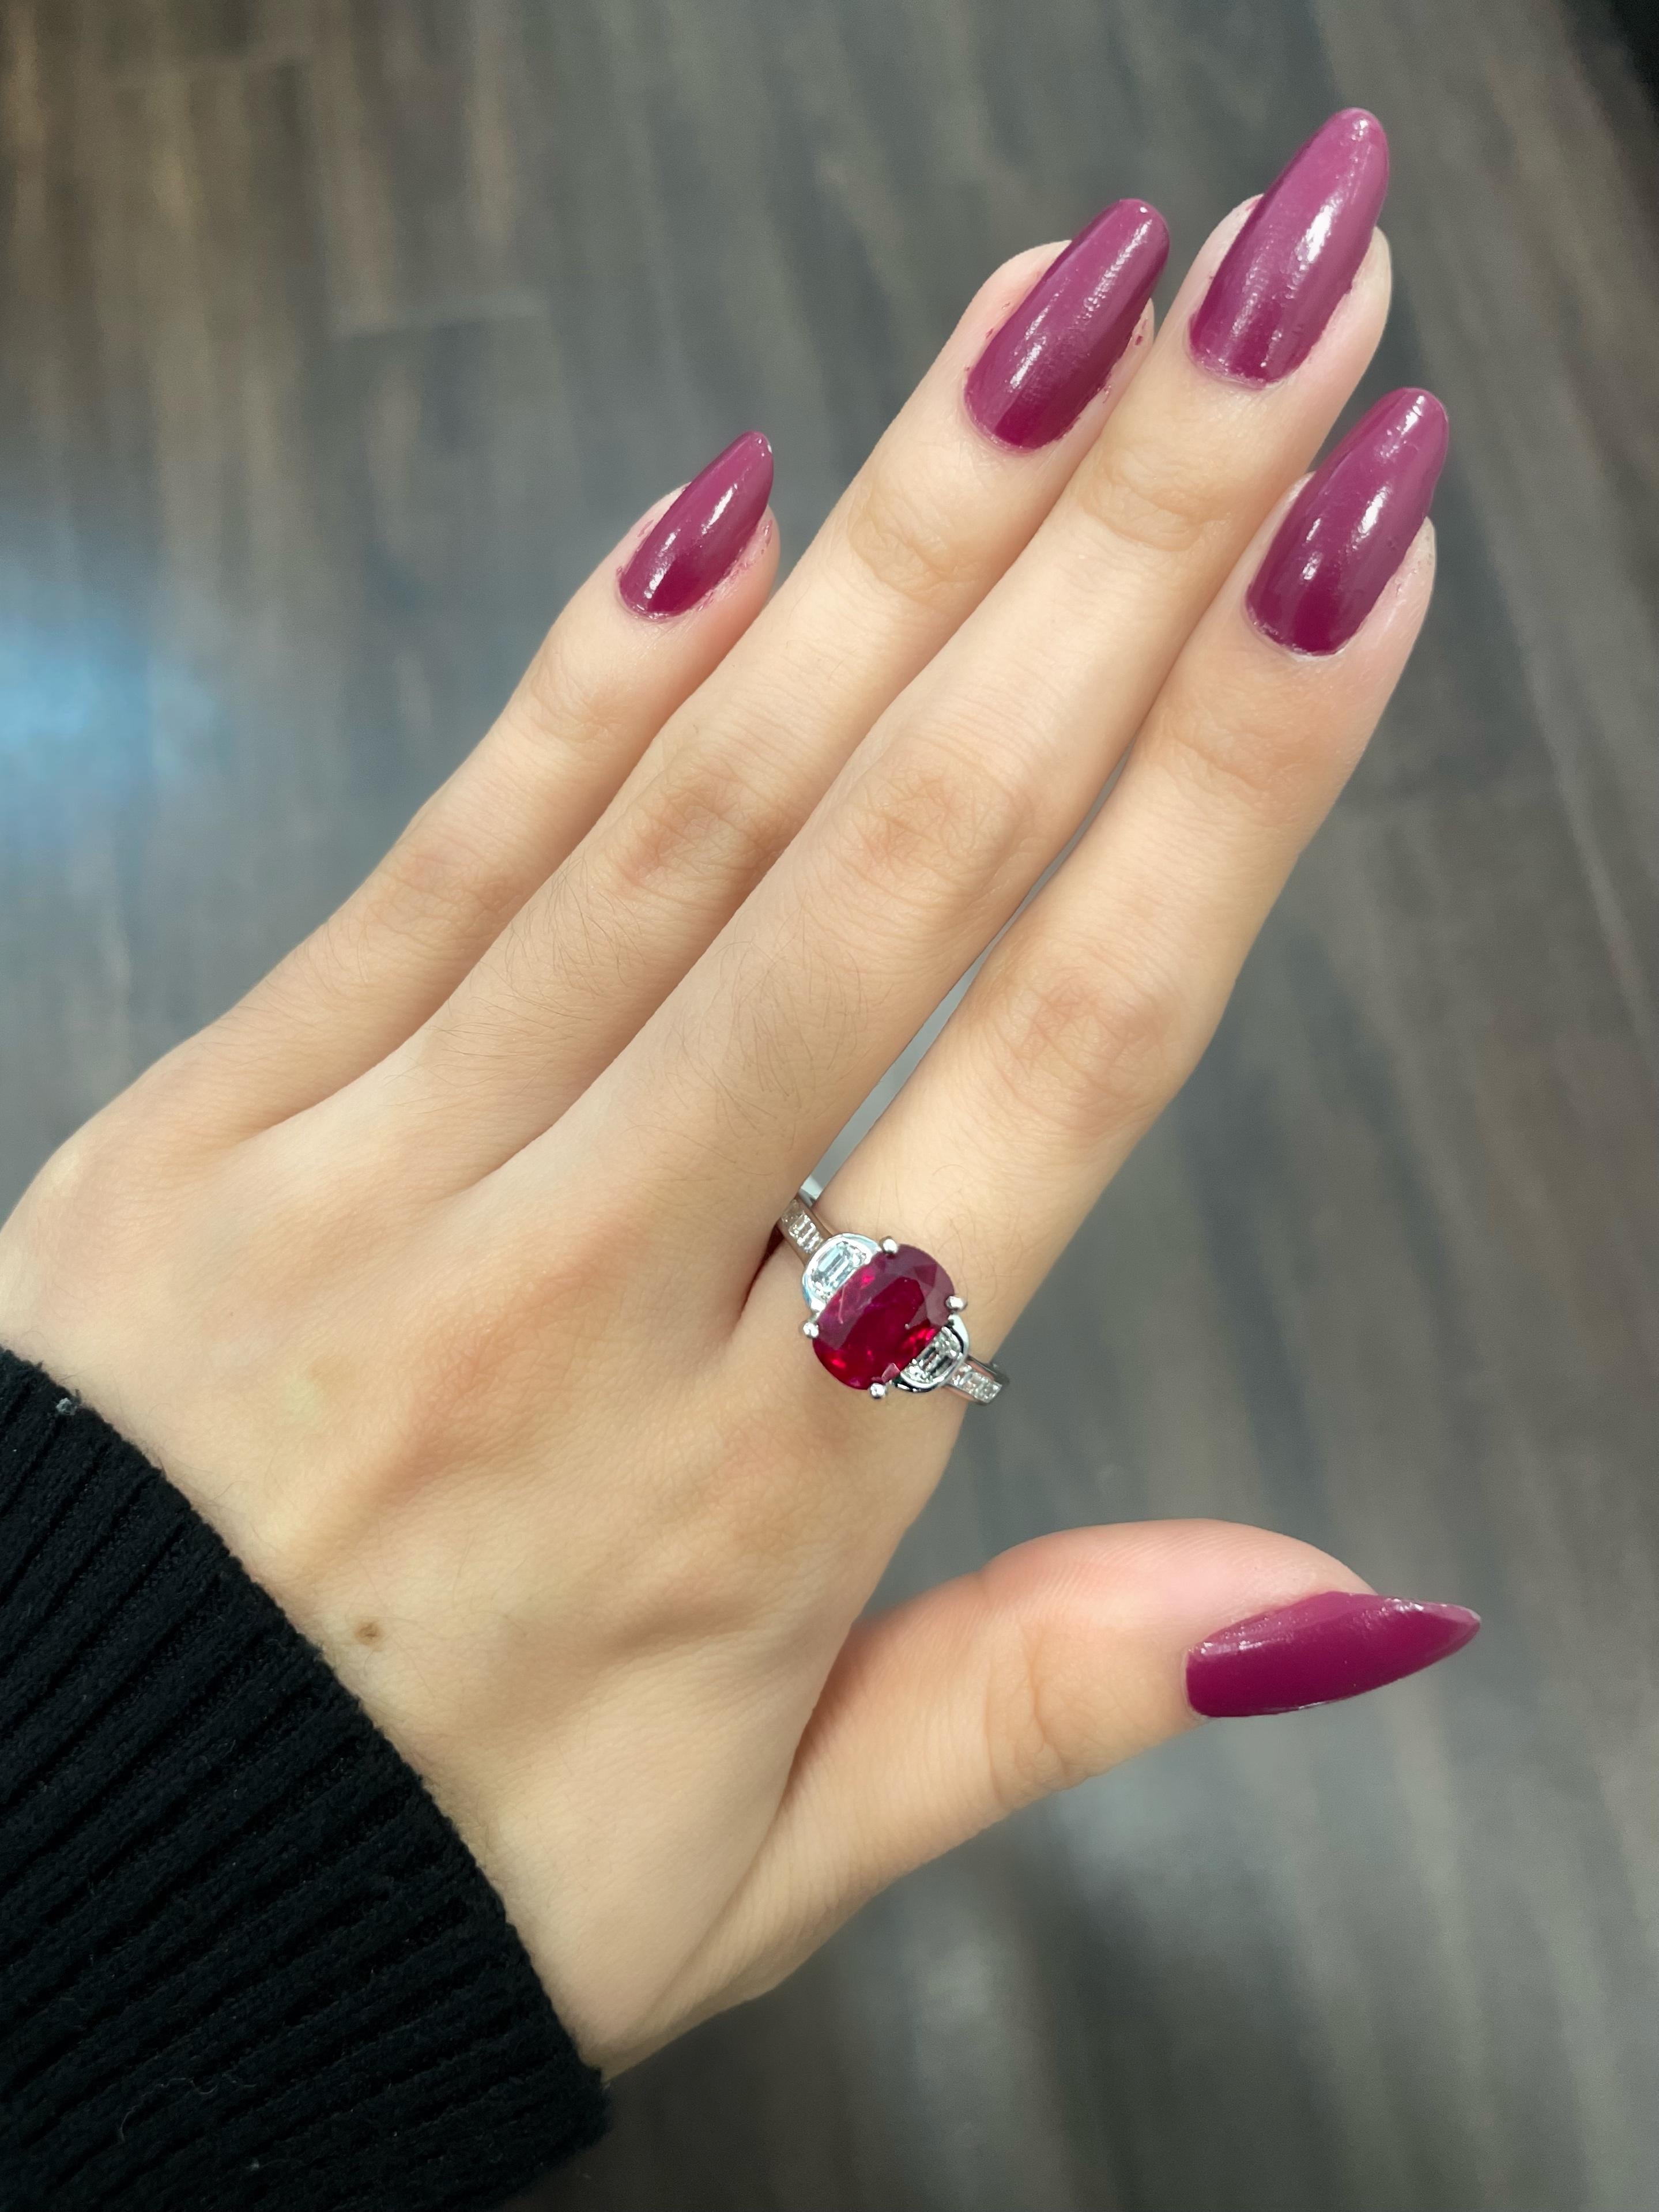 This natural ruby ring is an exceptional piece of jewelry with a 2.61 carat center stone. The ruby's deep red hue is simply mesmerizing, and its clarity is truly remarkable. The stone is set in a classic design, which is both elegant and timeless.